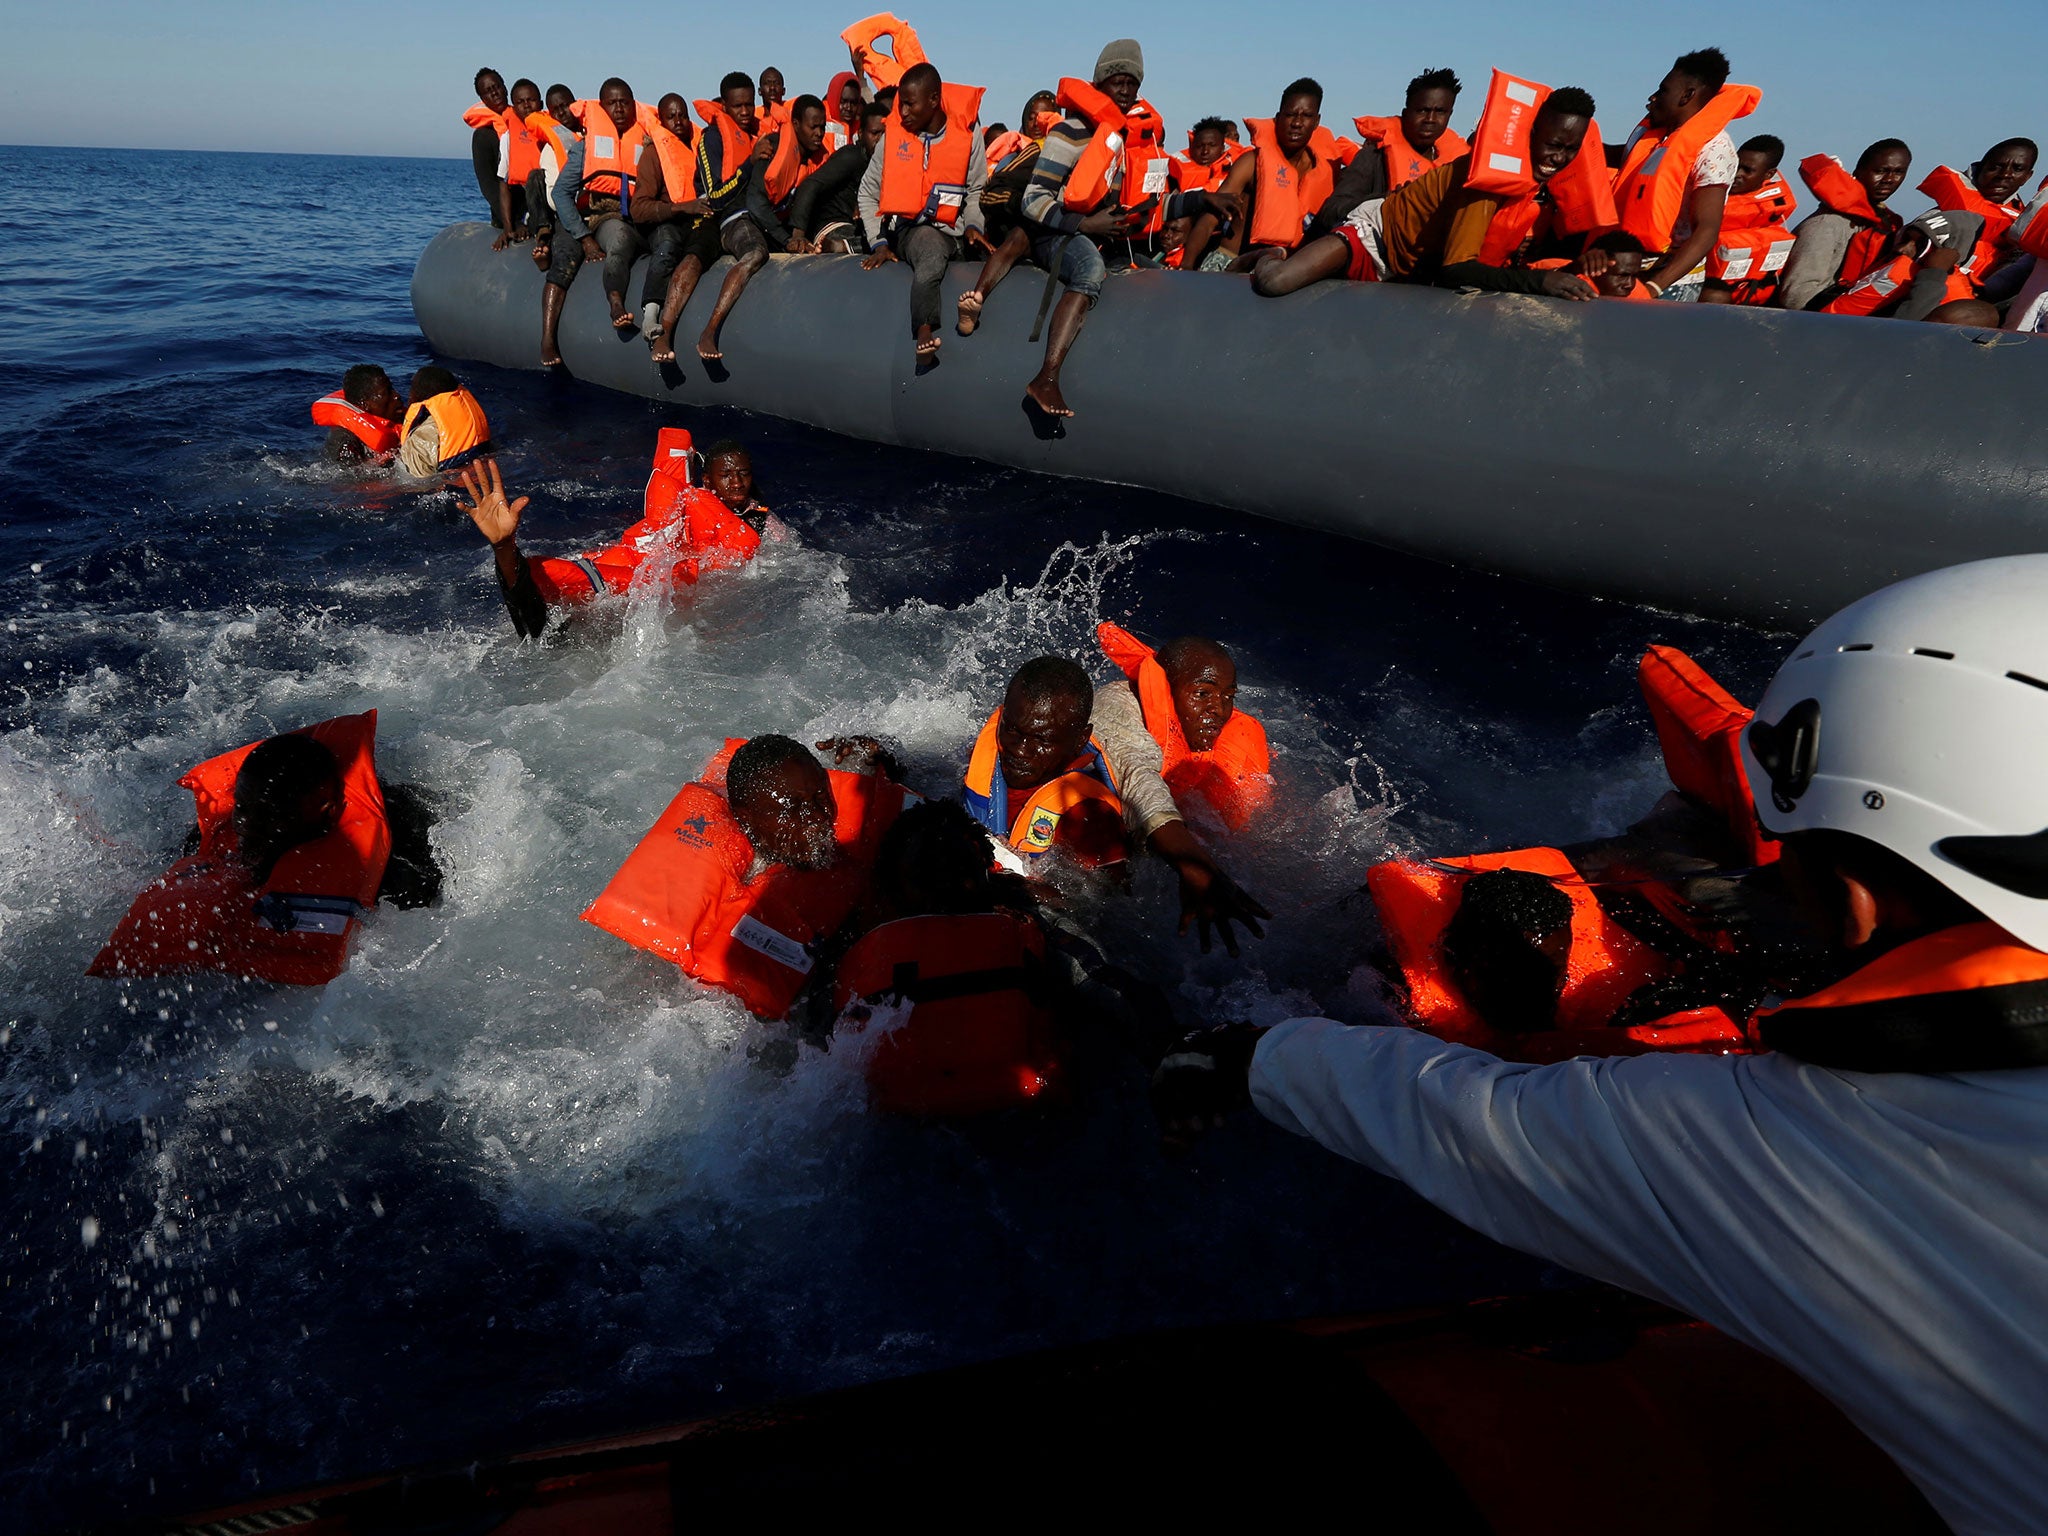 Migrants try to stay afloat after falling off their rubber dinghy during a rescue operation by Moas off the coast of Zawiya in Libya